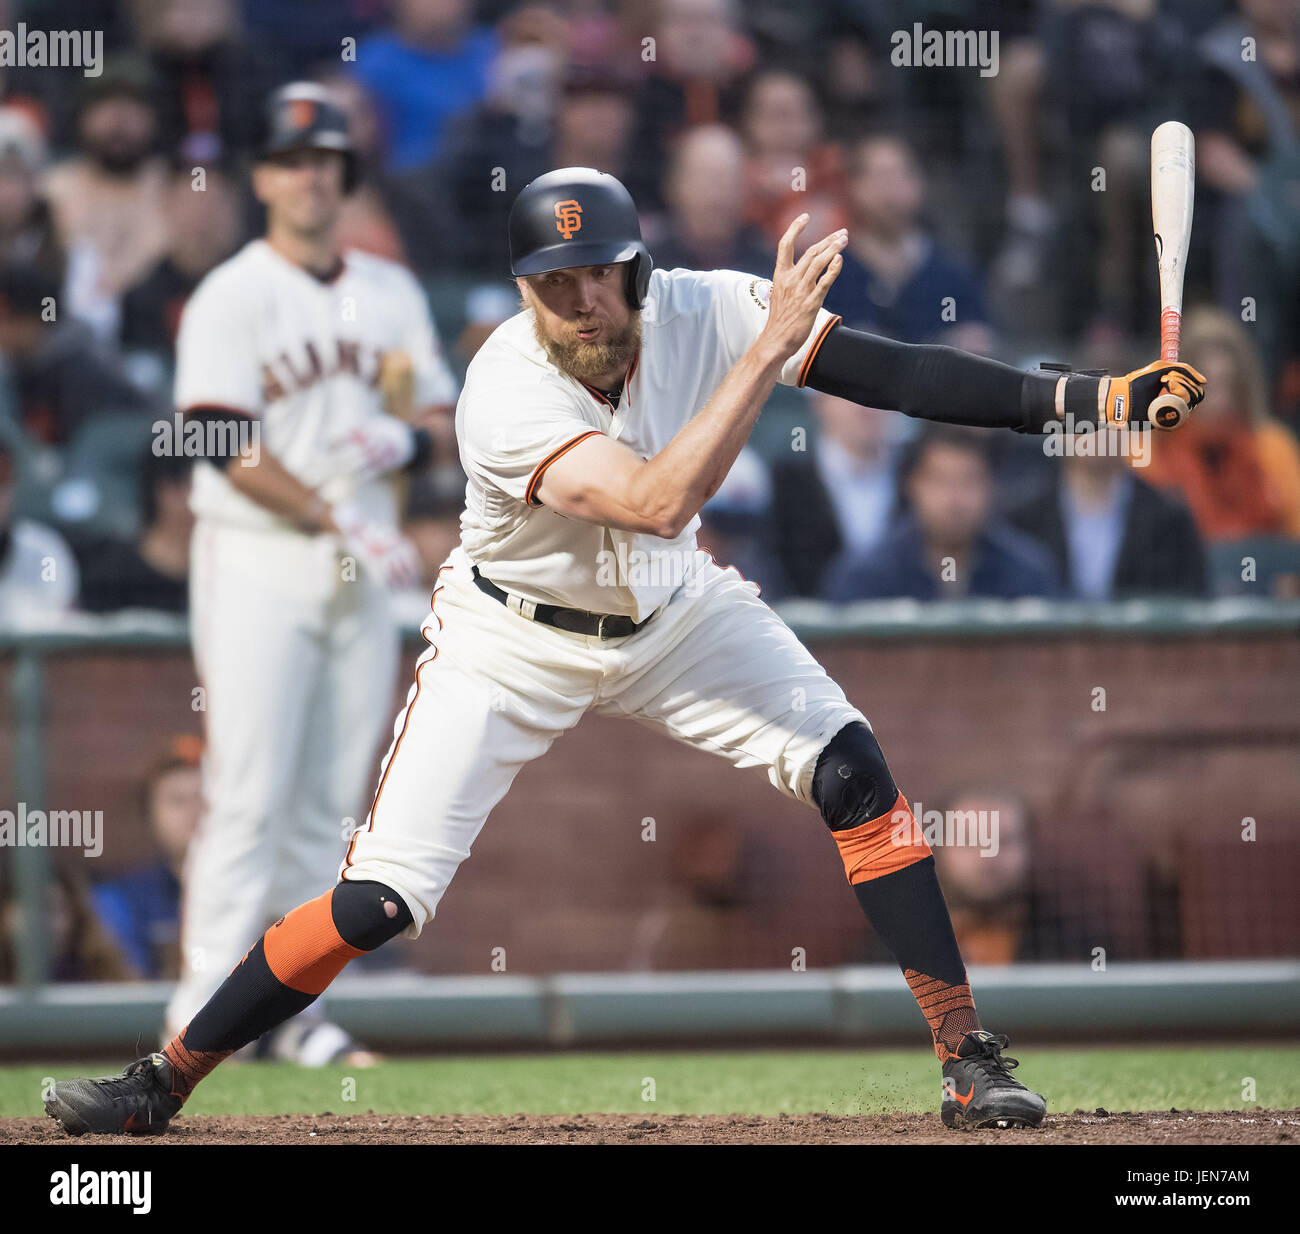 San Francisco, California, USA. 26th June, 2017. San Francisco Giants catcher Buster Posey (28) looks on as right fielder Hunter Pence (8) reacts to striking out in the fourth inning, during a MLB baseball game between the Colorado Rockies and the San Francisco Giants on LGBT Night at AT&T Park in San Francisco, California. Valerie Shoaps/CSM/Alamy Live News Stock Photo